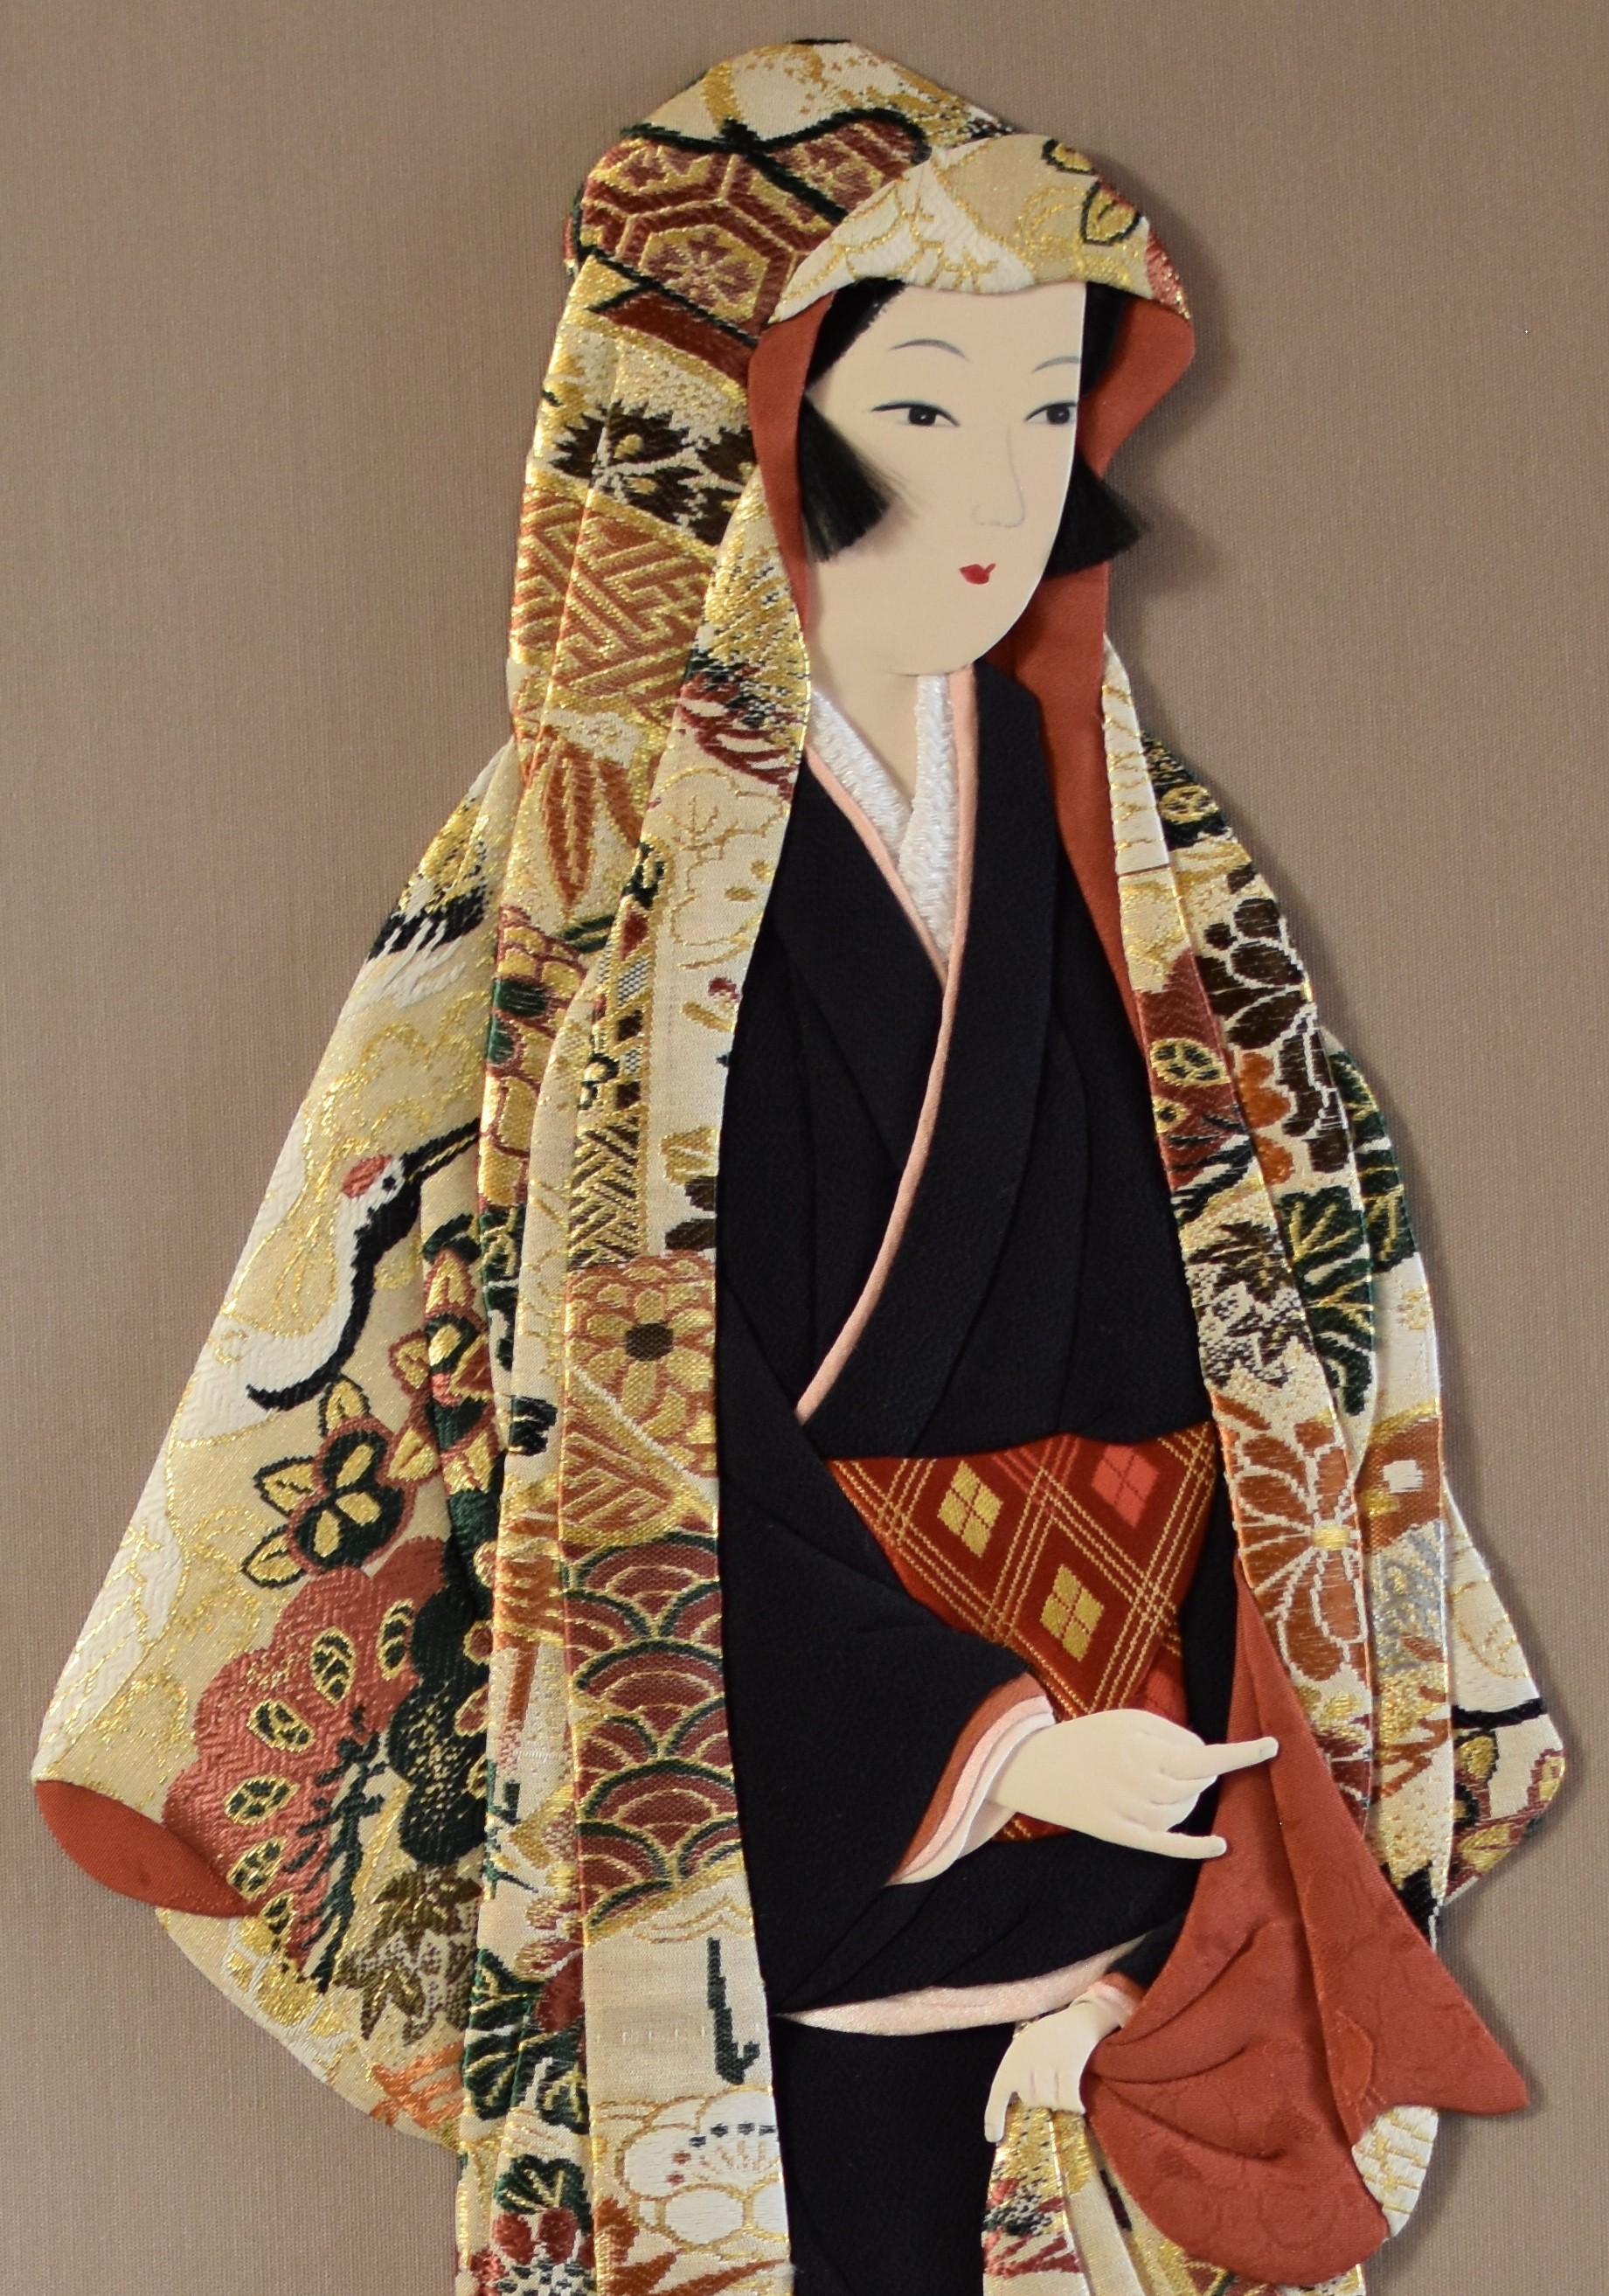 Extraordinary hand crafted Japanese contemporary traditional oshie decorative art piece with a stunning three-dimensional effect. This is a traditional Japanese handcrafted wall decorative art form using high quality silk and brocade fabrics, known